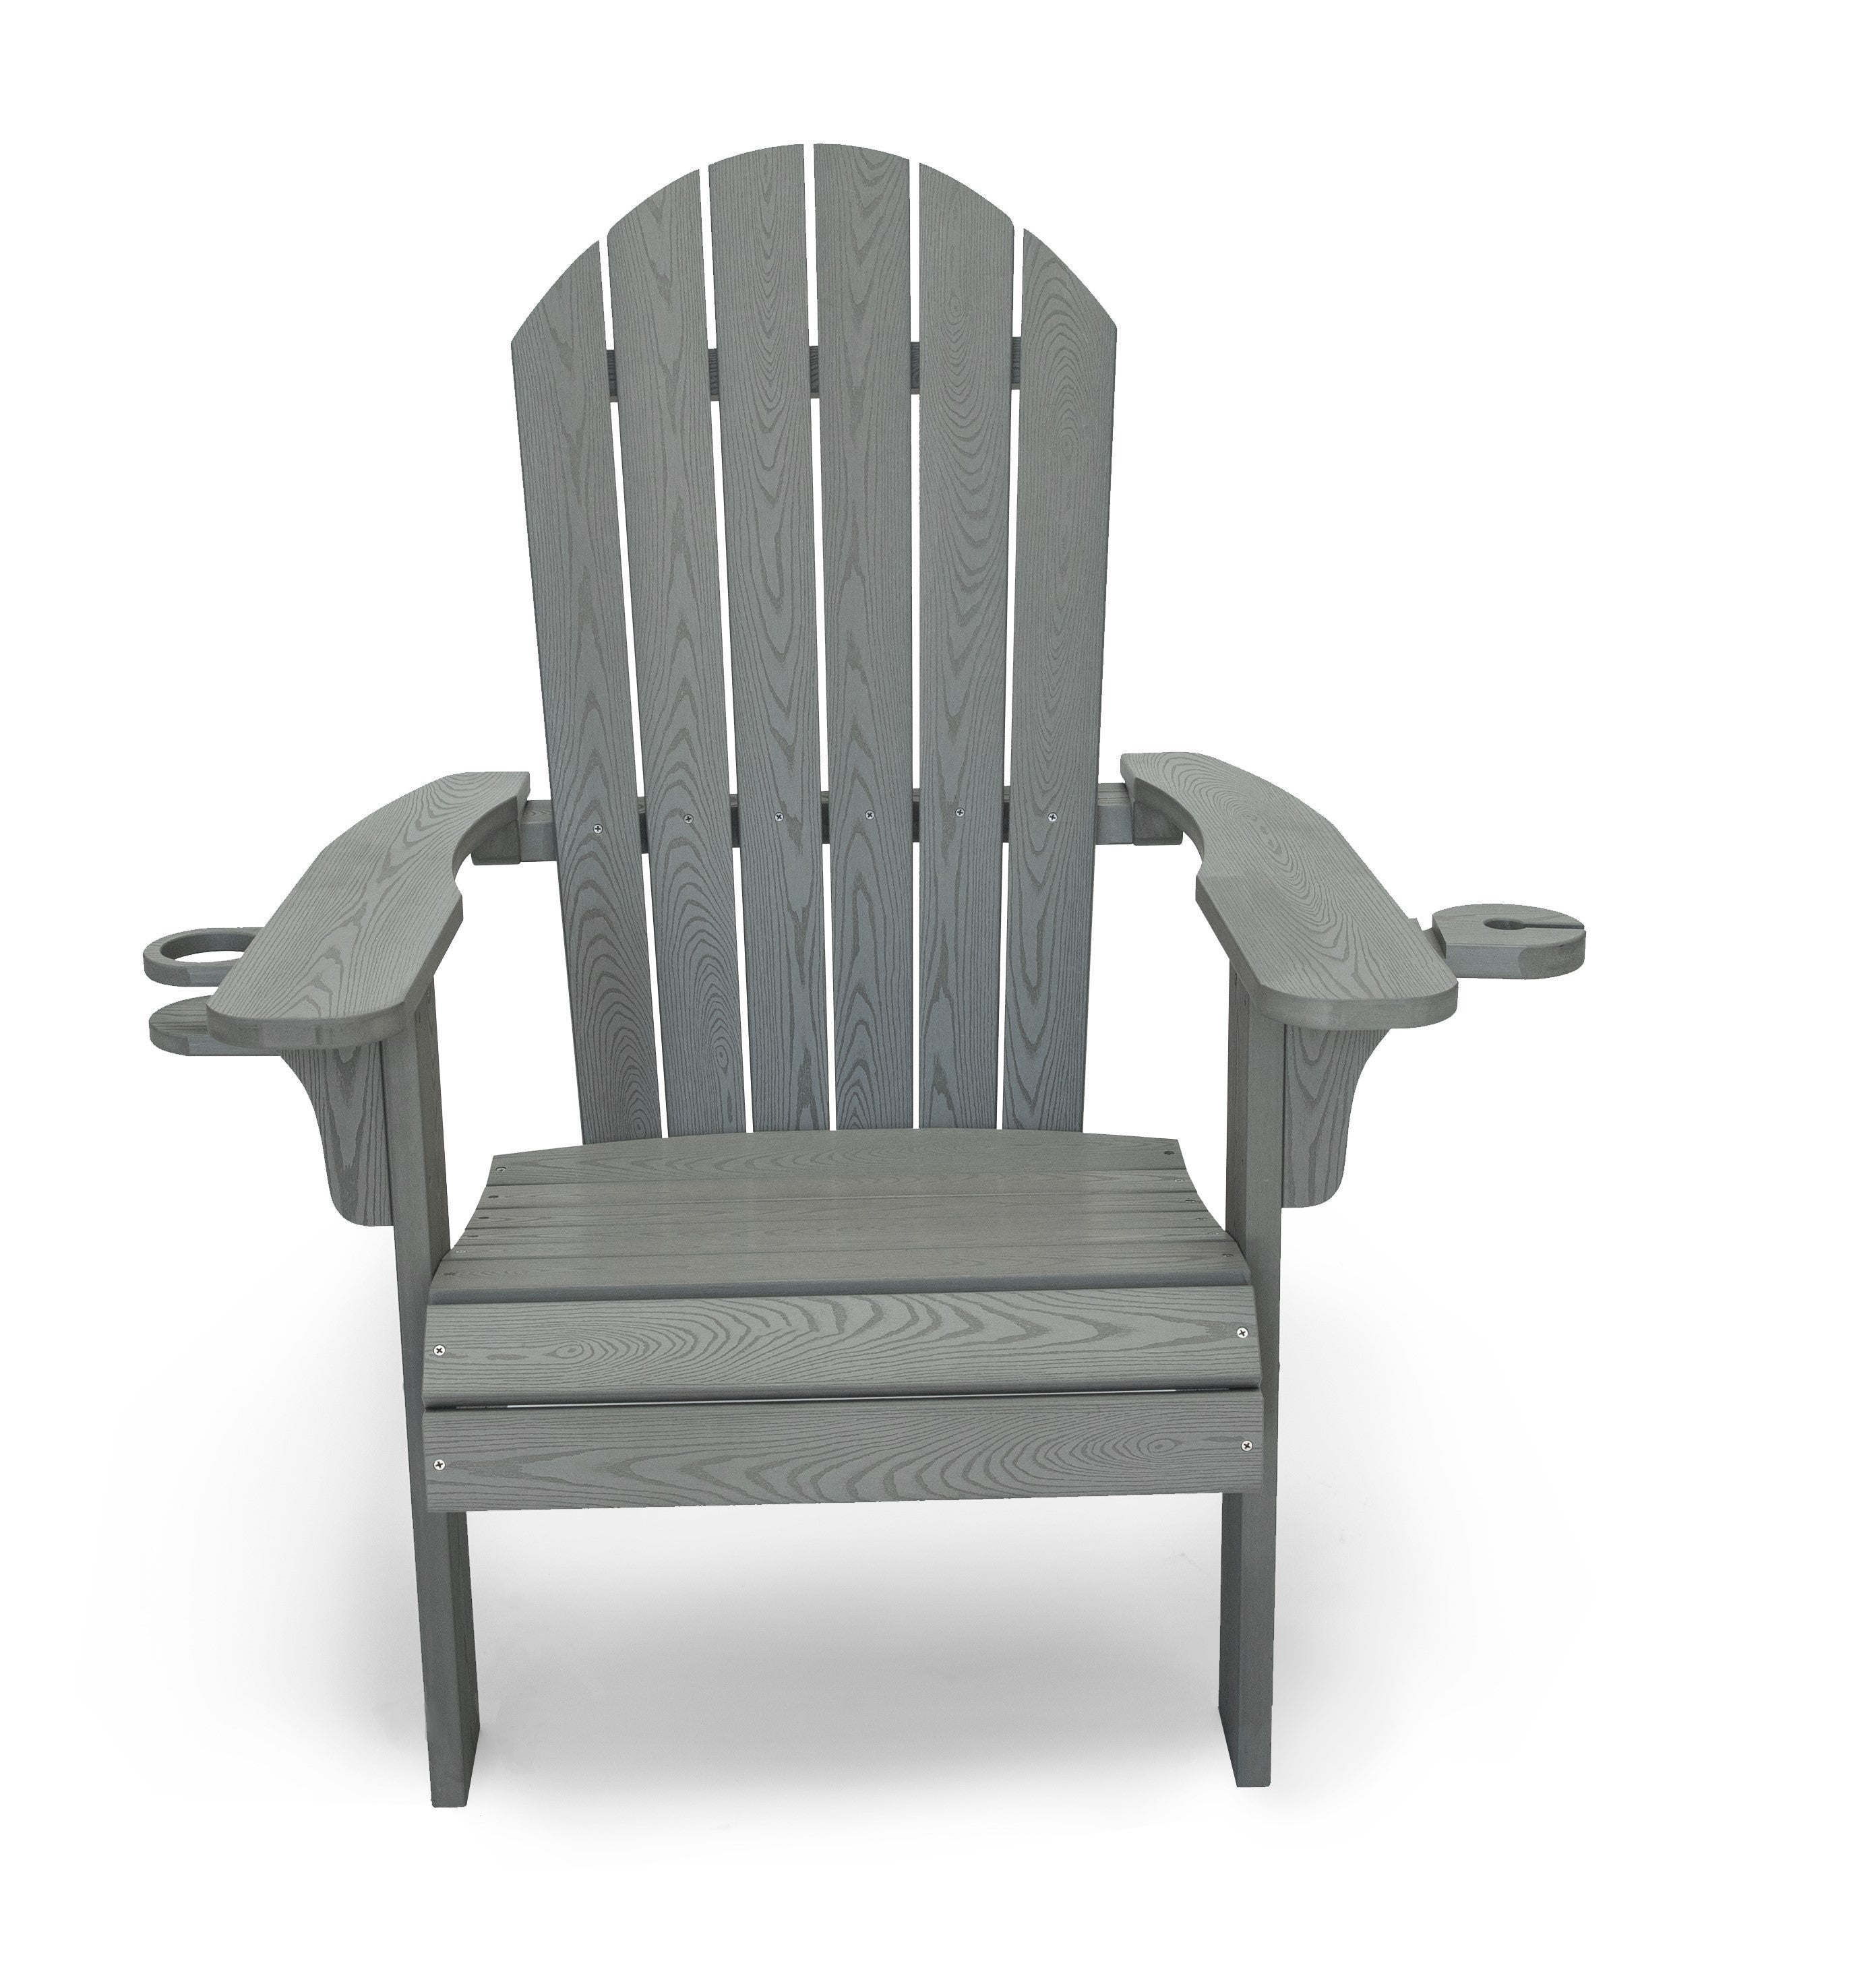 Westwood All Weather Outdoor Patio Adirondack Chair (3-Piece)